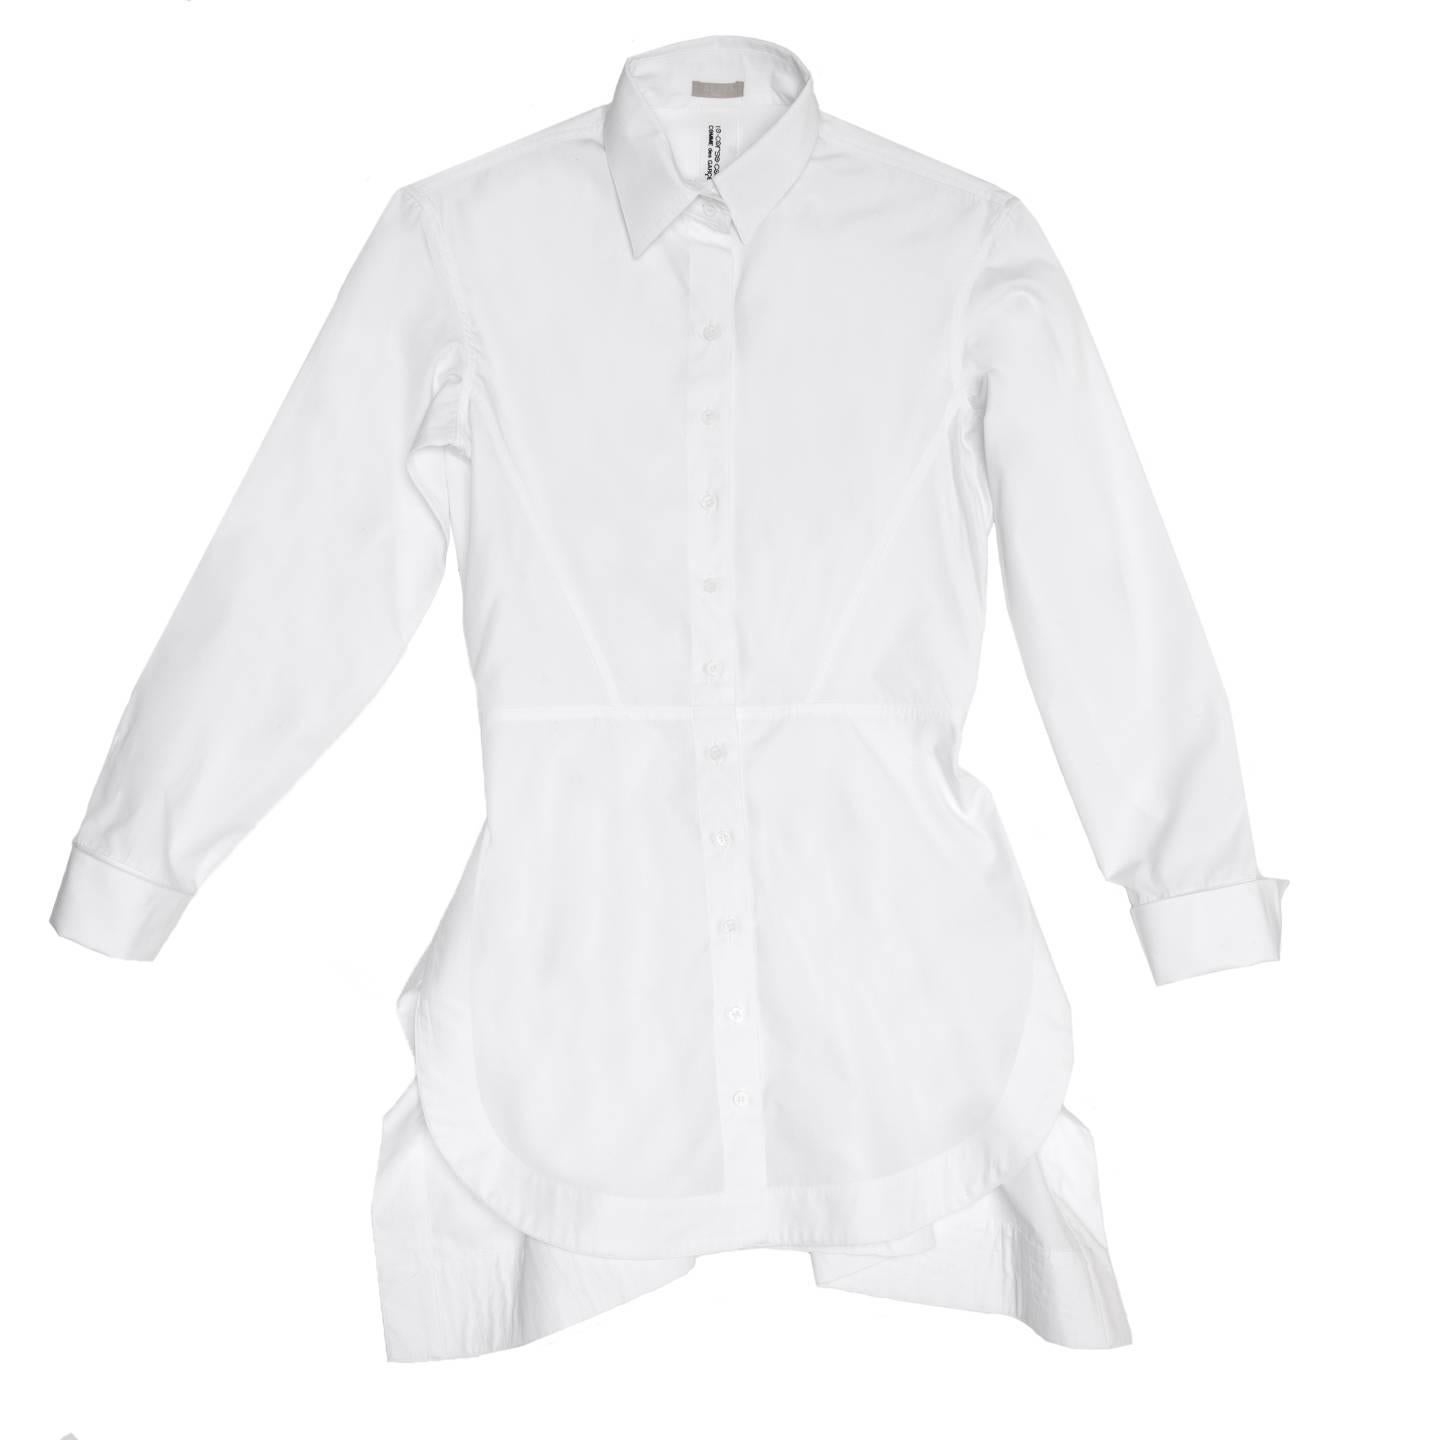 White plain cotton long shirt with peplum waist seam at front and belt insert at back. The skirt is flared and both the back body and skirt are ruched. The front hem is round while the back is squared; the cuffs are french style, with turn backs and